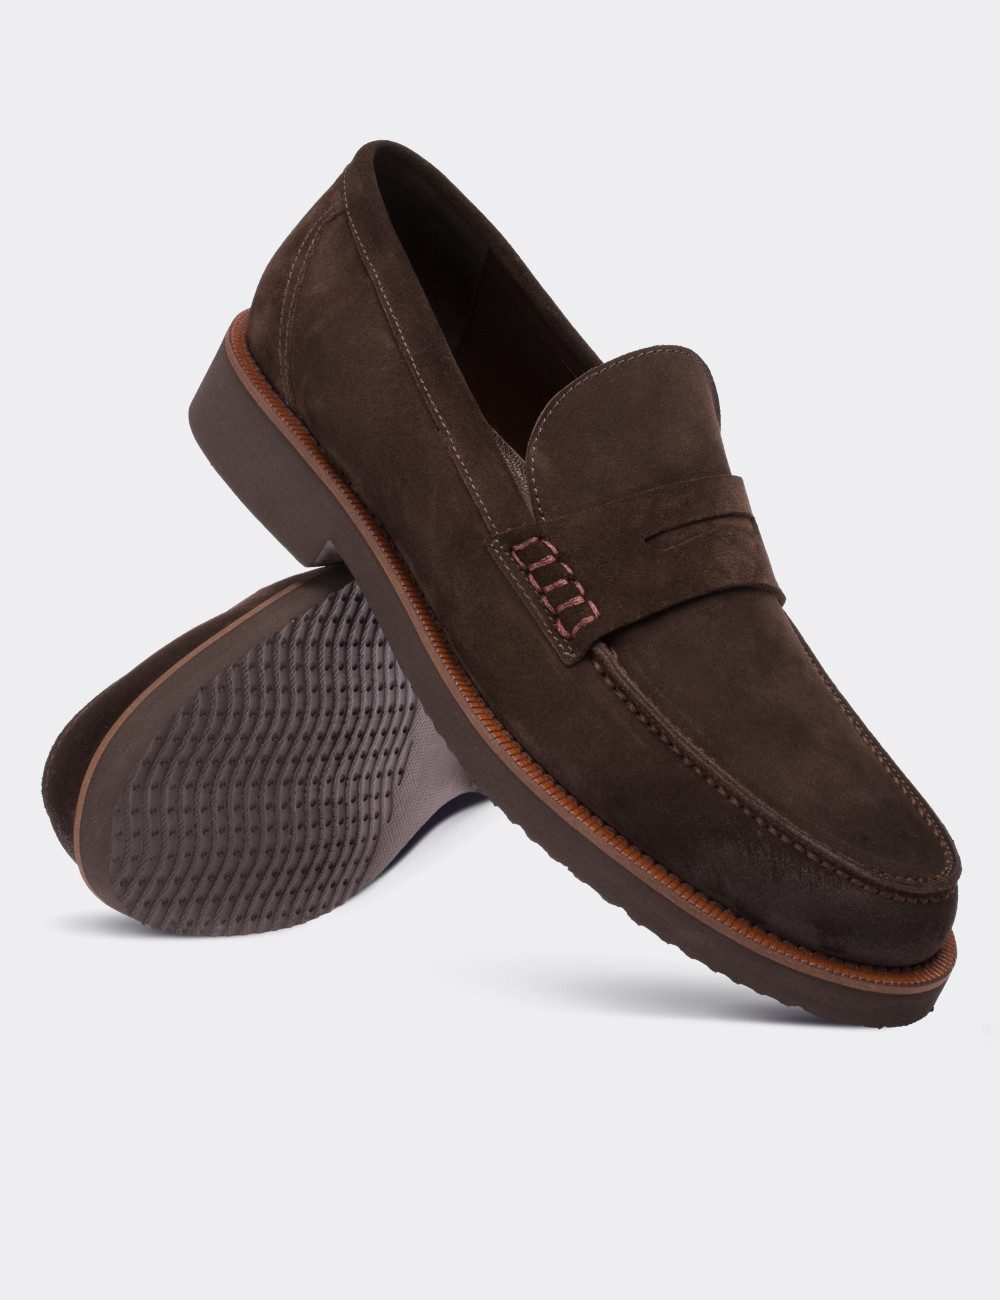 Brown Suede Leather Loafers & Moccasins Shoes - 01538MKHVE04